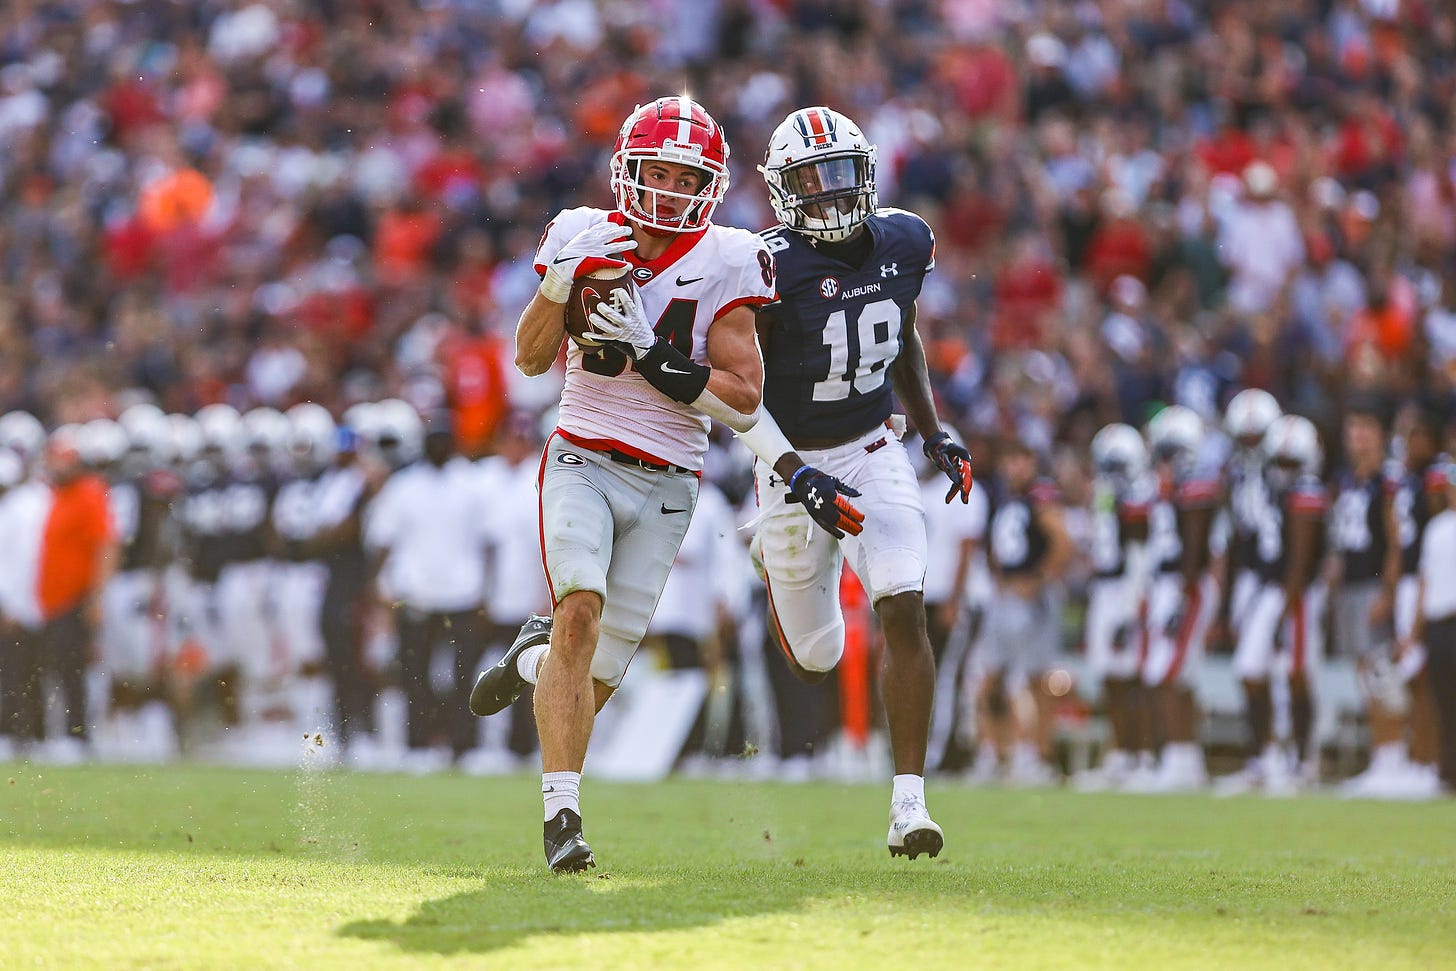 Georgia wide receiver Ladd McConkey (84) during the Bulldogs’ game against Auburn at Jordan-Hare Stadium in Auburn, Ala., on Saturday, Oct. 9, 2021. (Photo by Tony Walsh)